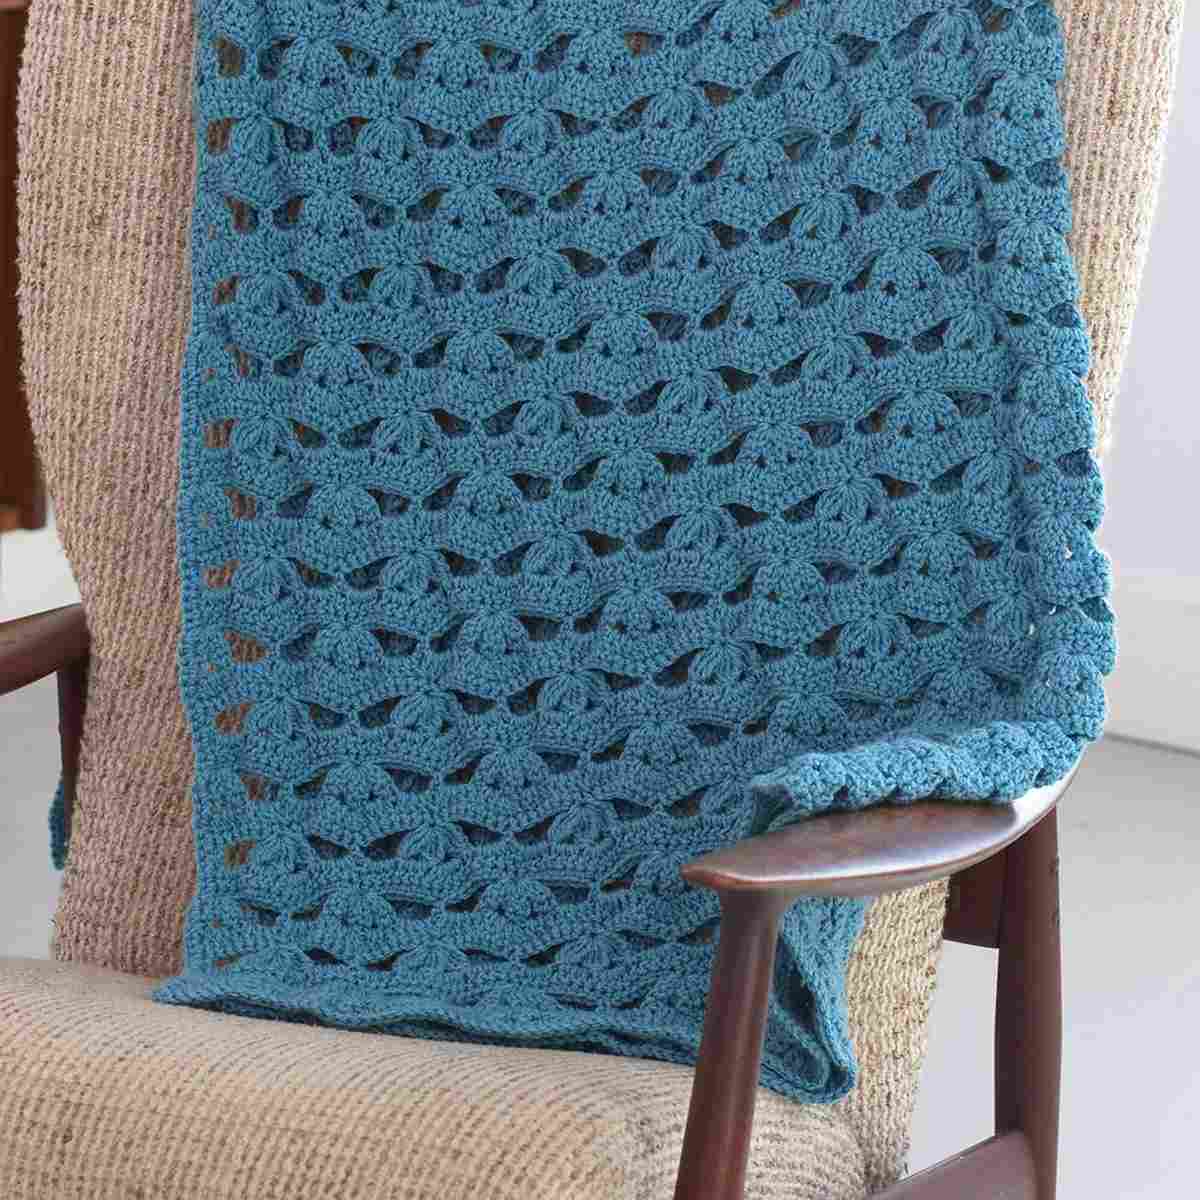 Light and Airy Afghan - Free Crochet Pattern